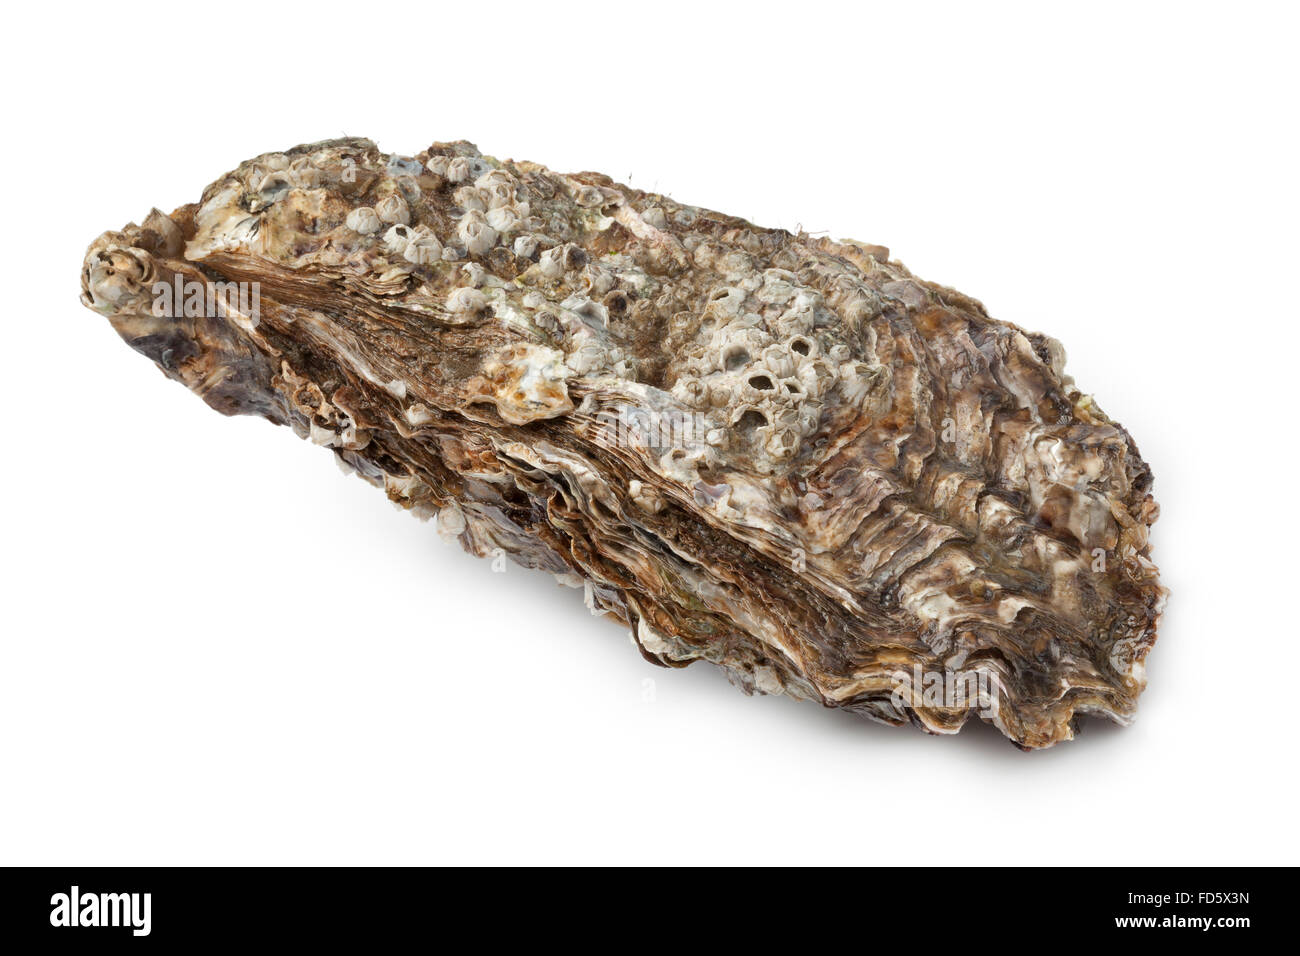 Whole single fresh Pacific oyster on white background Stock Photo